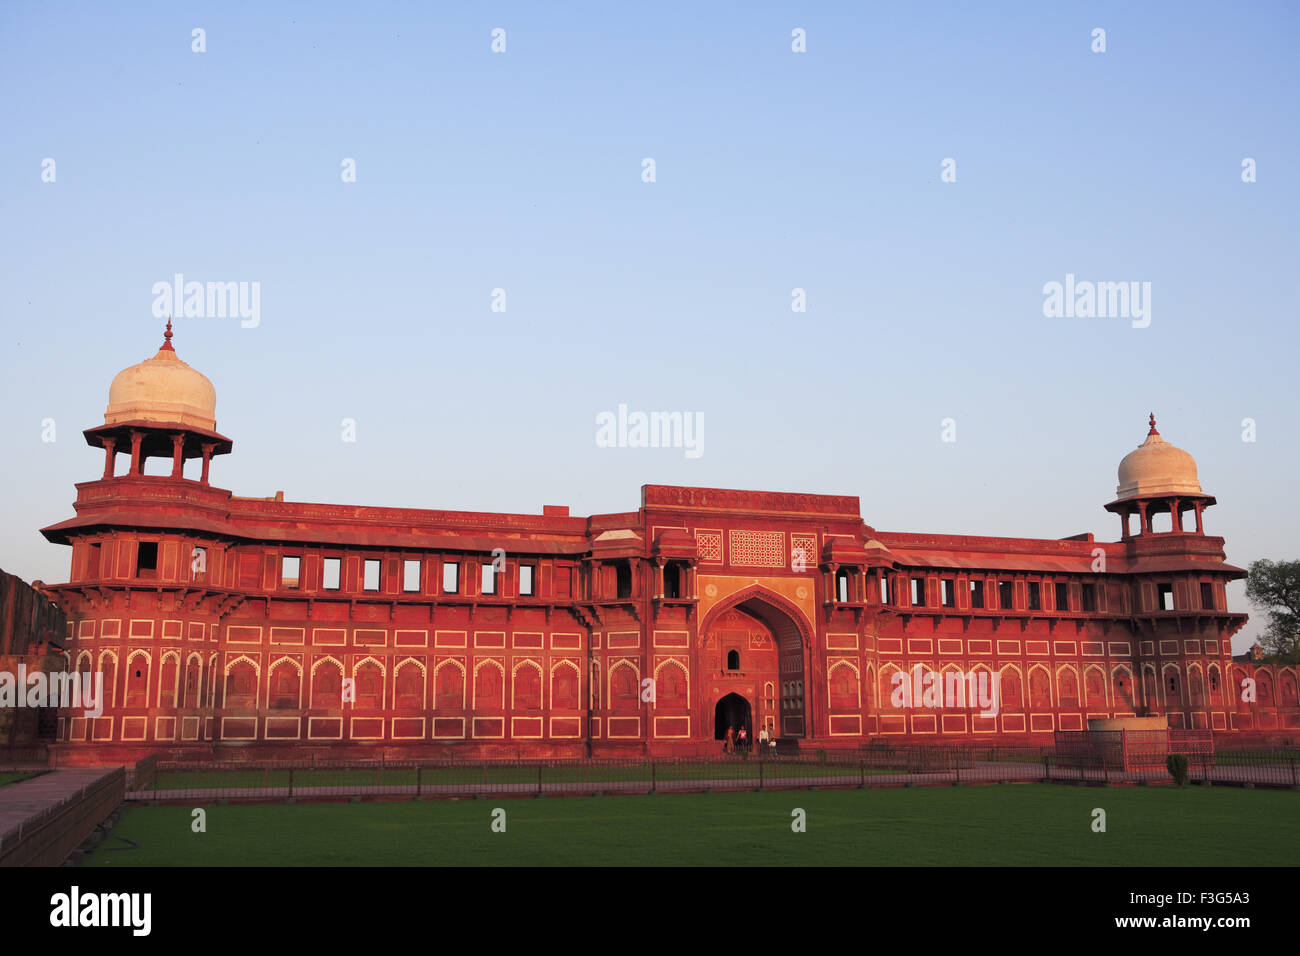 Agra Fort Built In 16th Century By Mughal Emperor Made By Red Sand